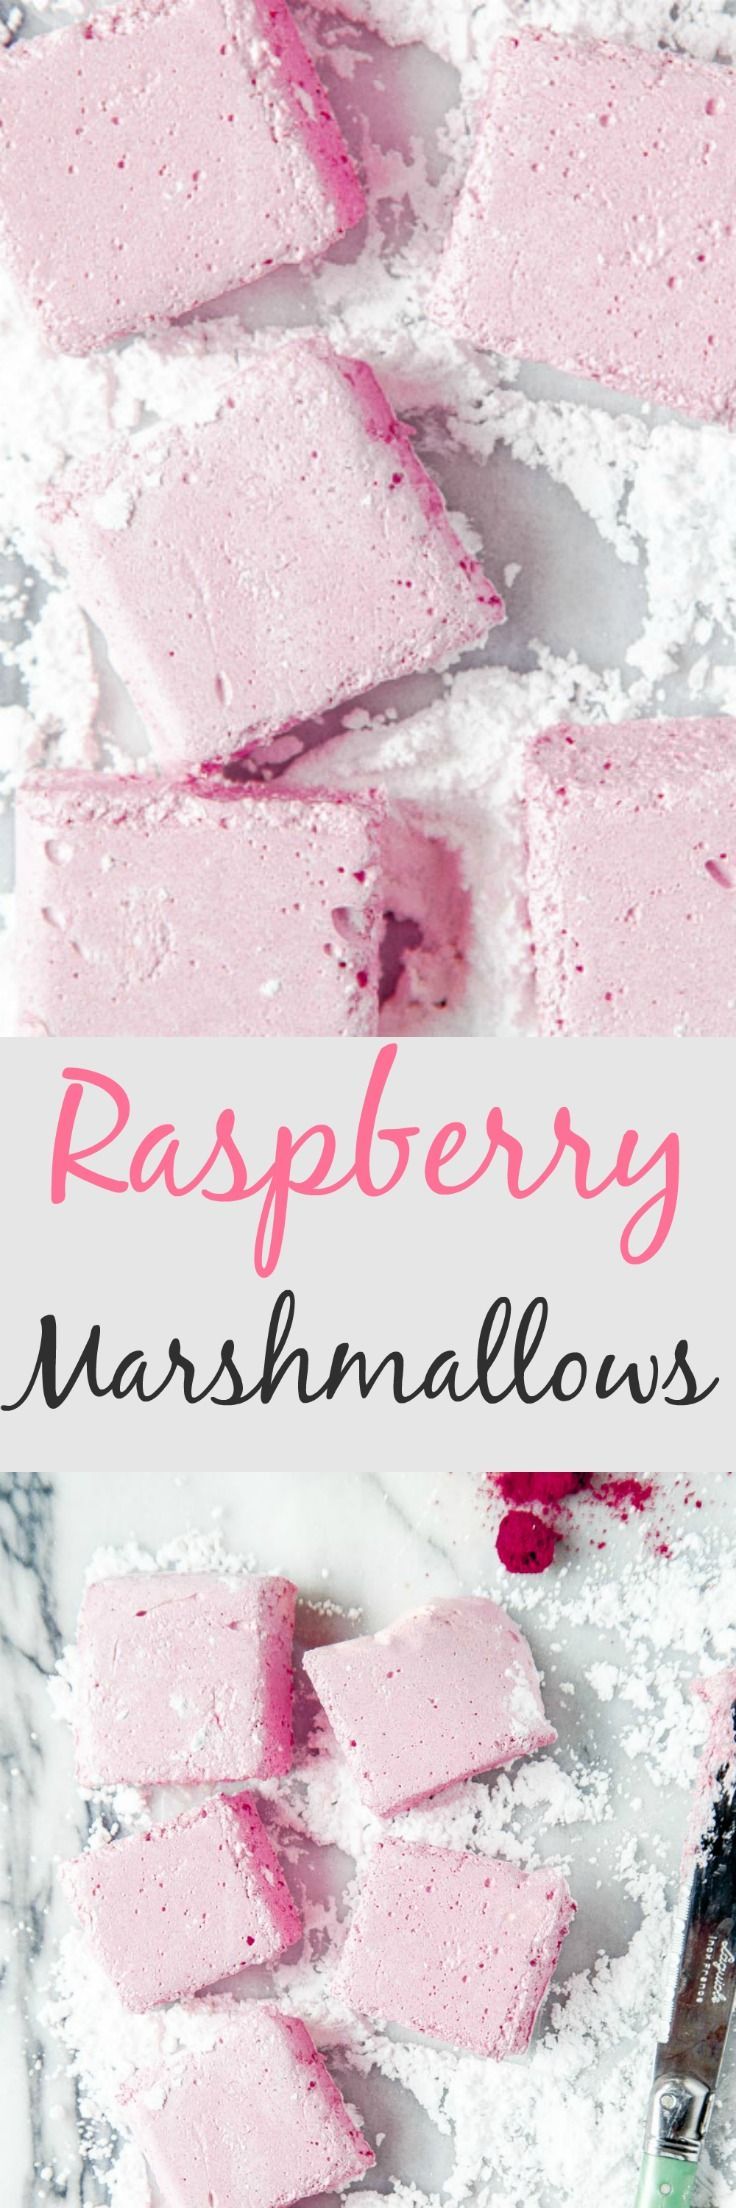 Homemade pink raspberry marshmallows for your sweetie on Valentine’s Day! Small batch recipe @DessertForTwo